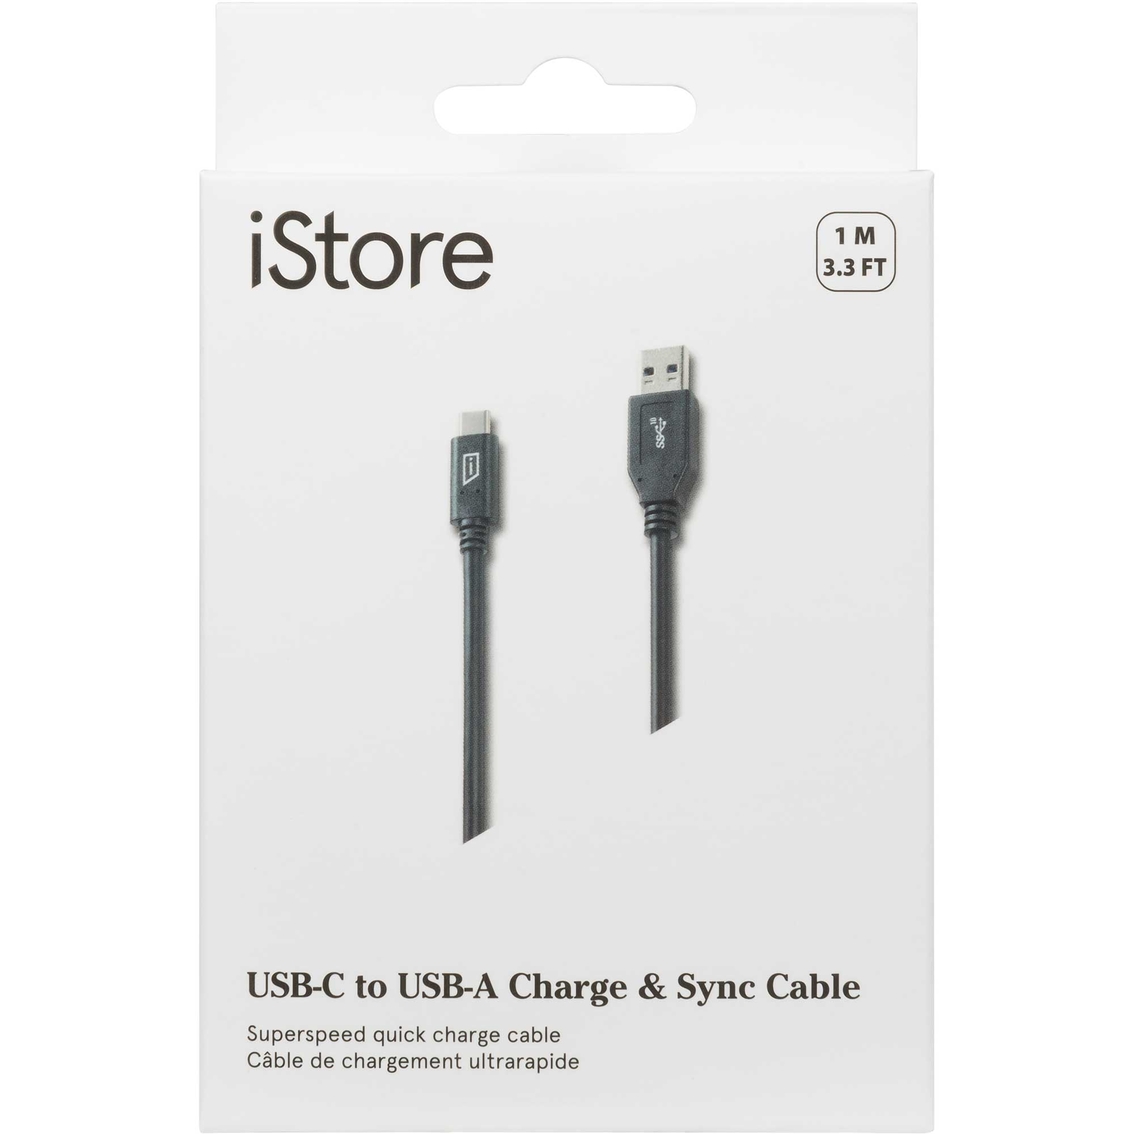 Targus iStore USB C to USB A Cable - Image 1 of 3